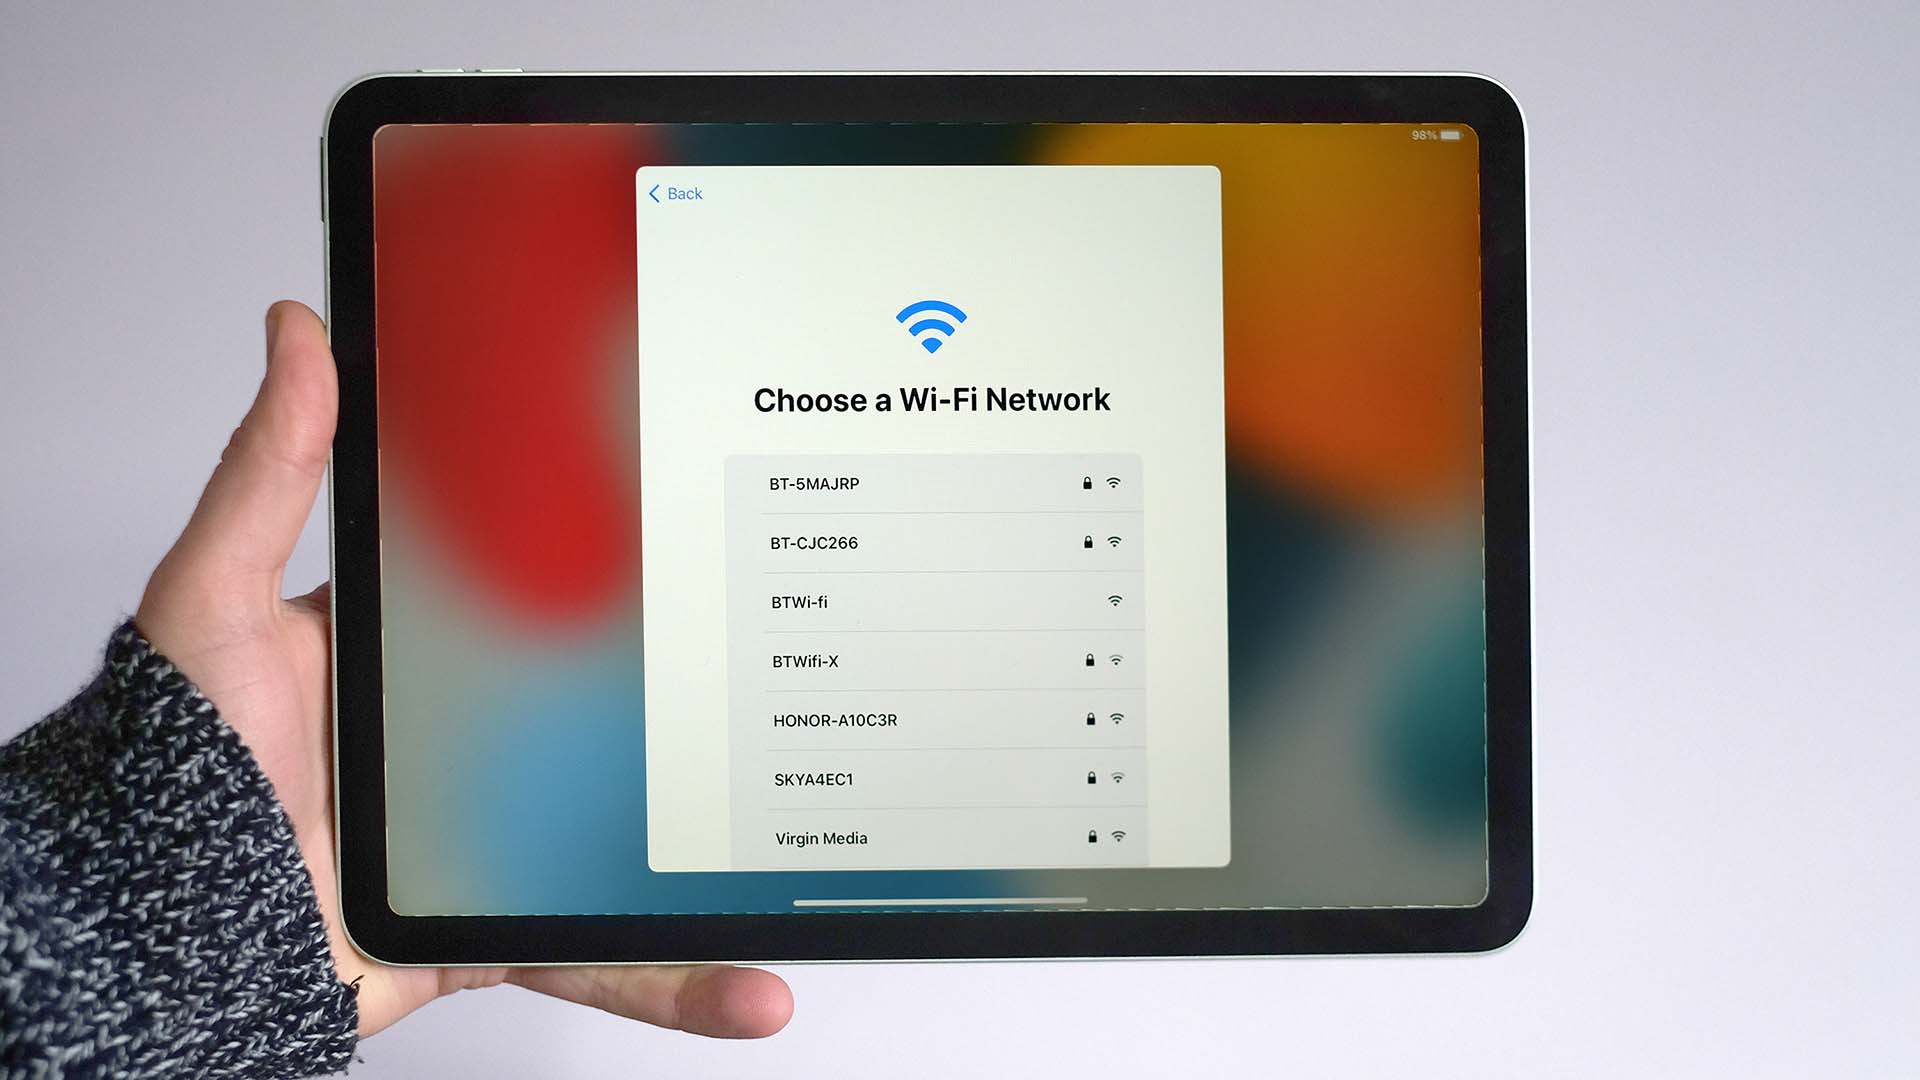 An iPad with the screen showing the options for choosing a wi-fi